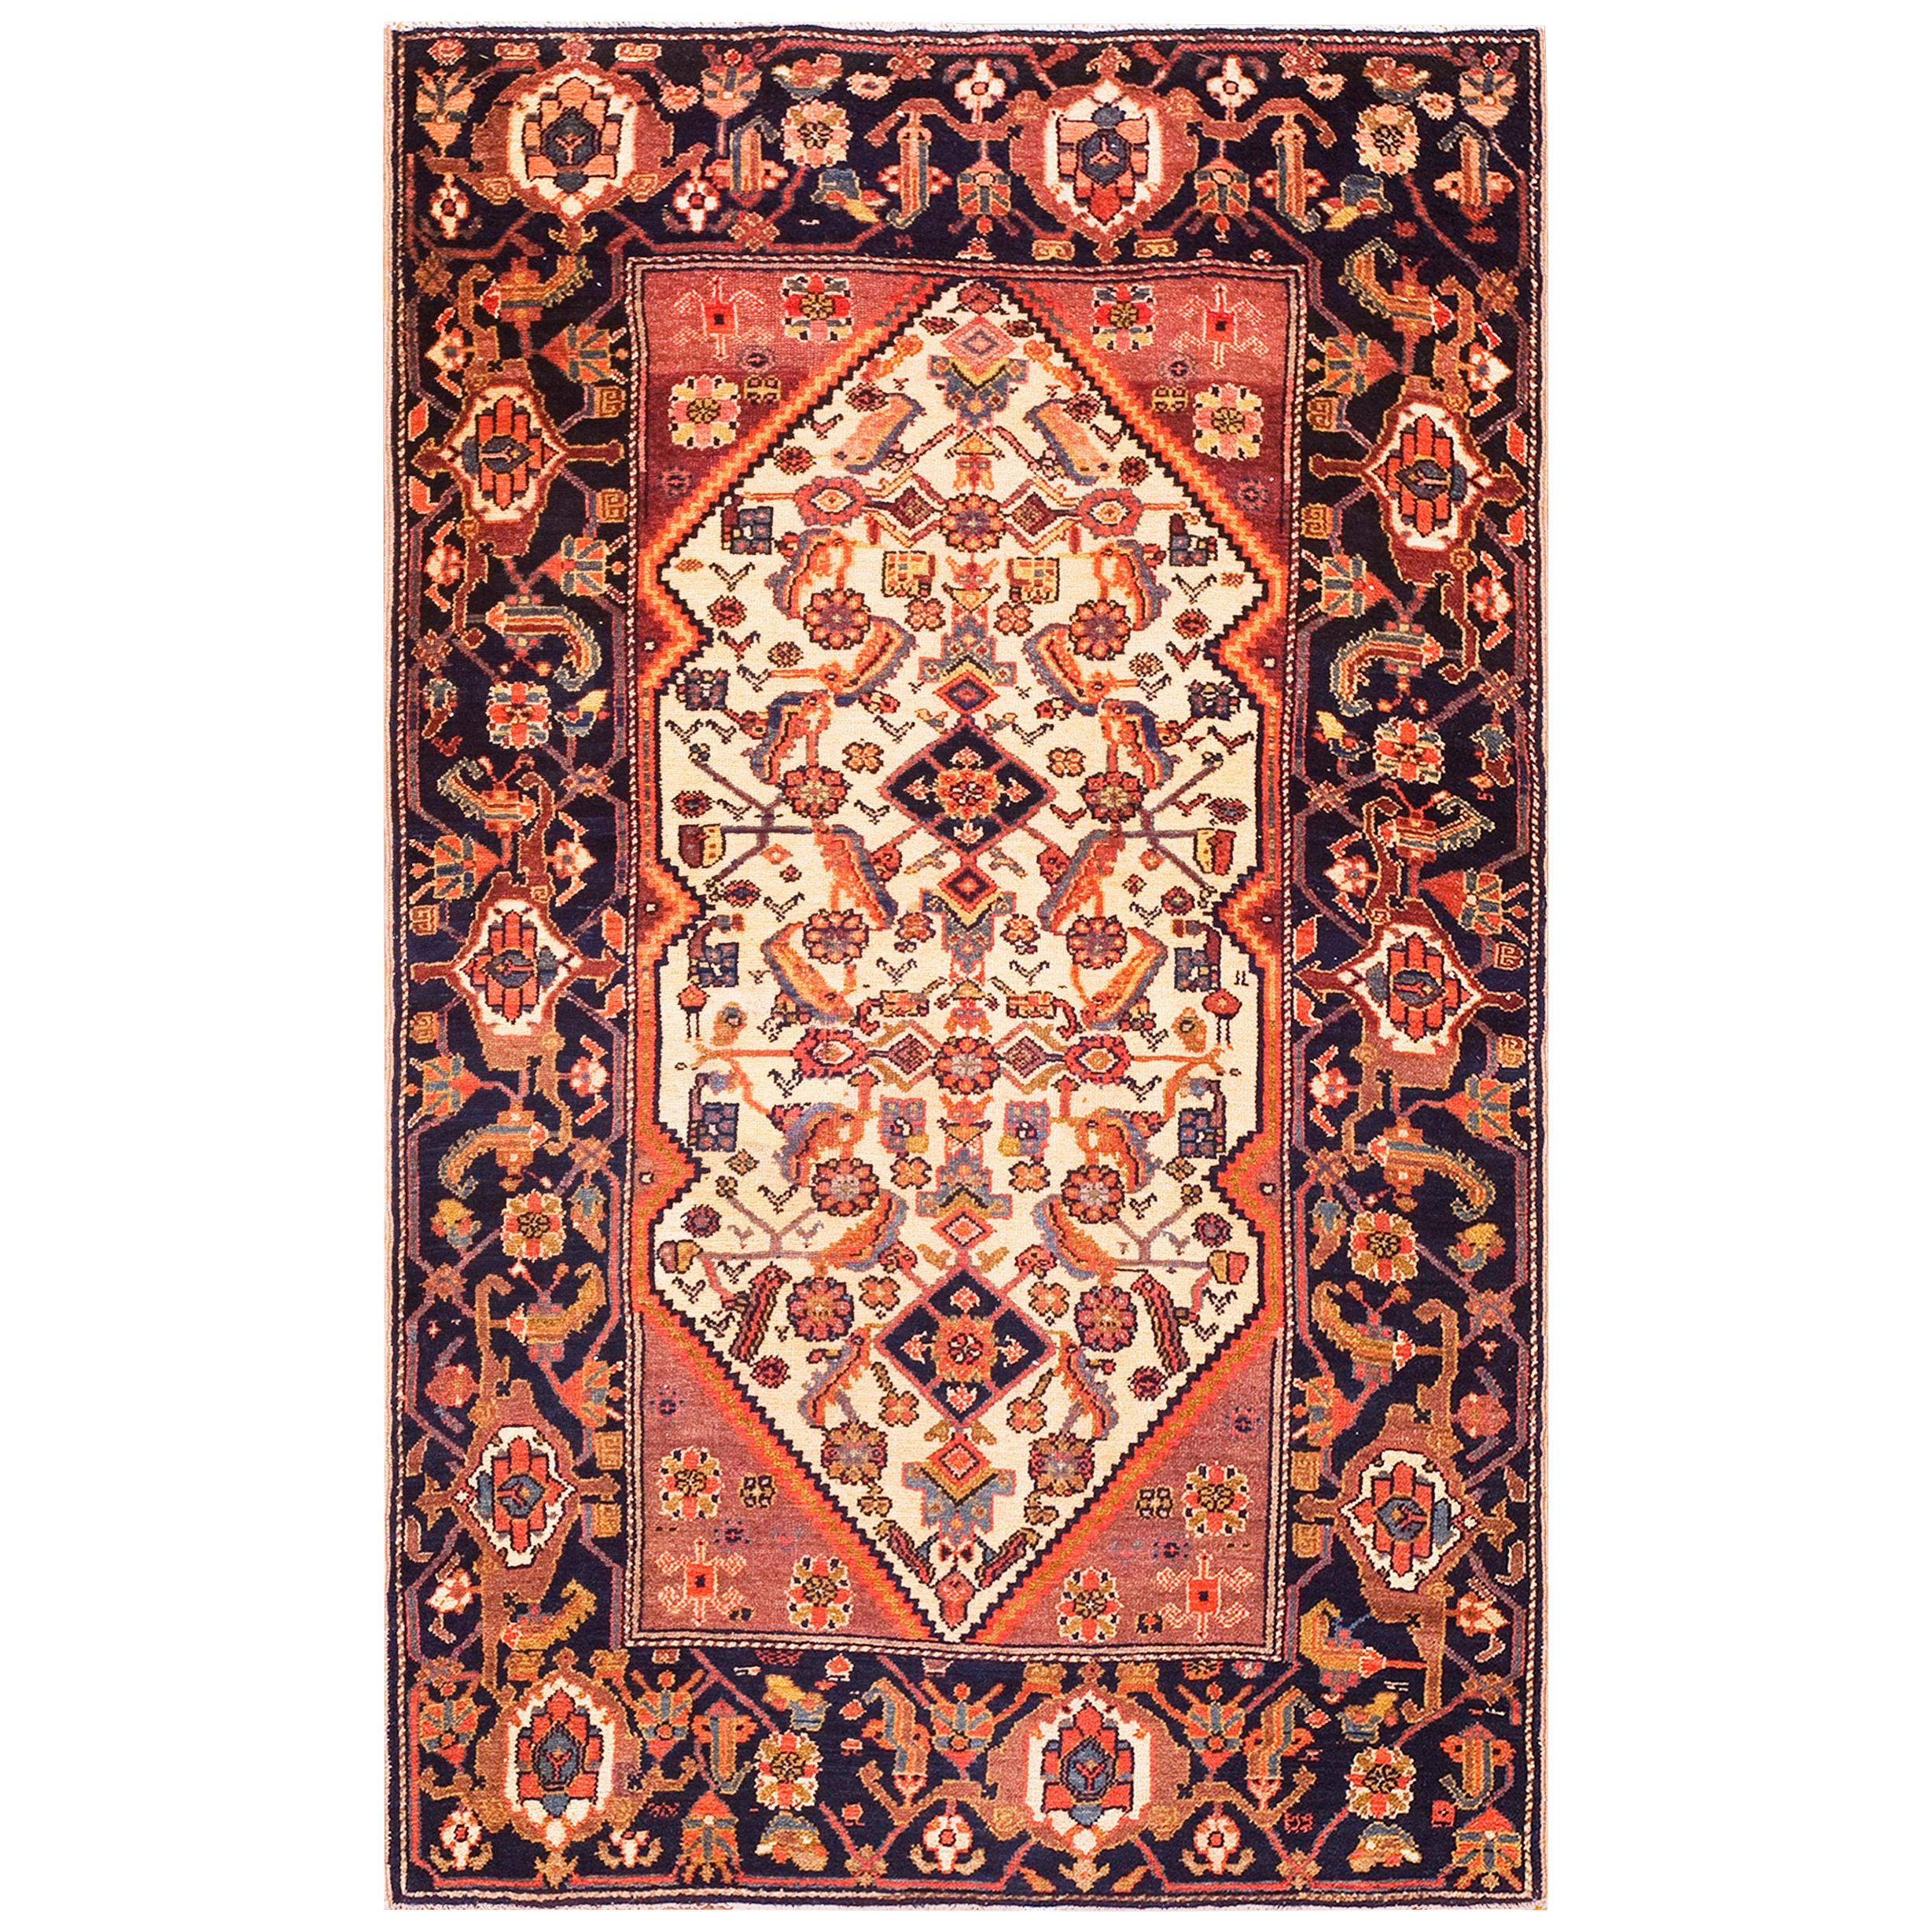 Late 19th Century  Persian Malayer Carpet ( 3'5" x 5'8" - 104 x 173 ) For Sale